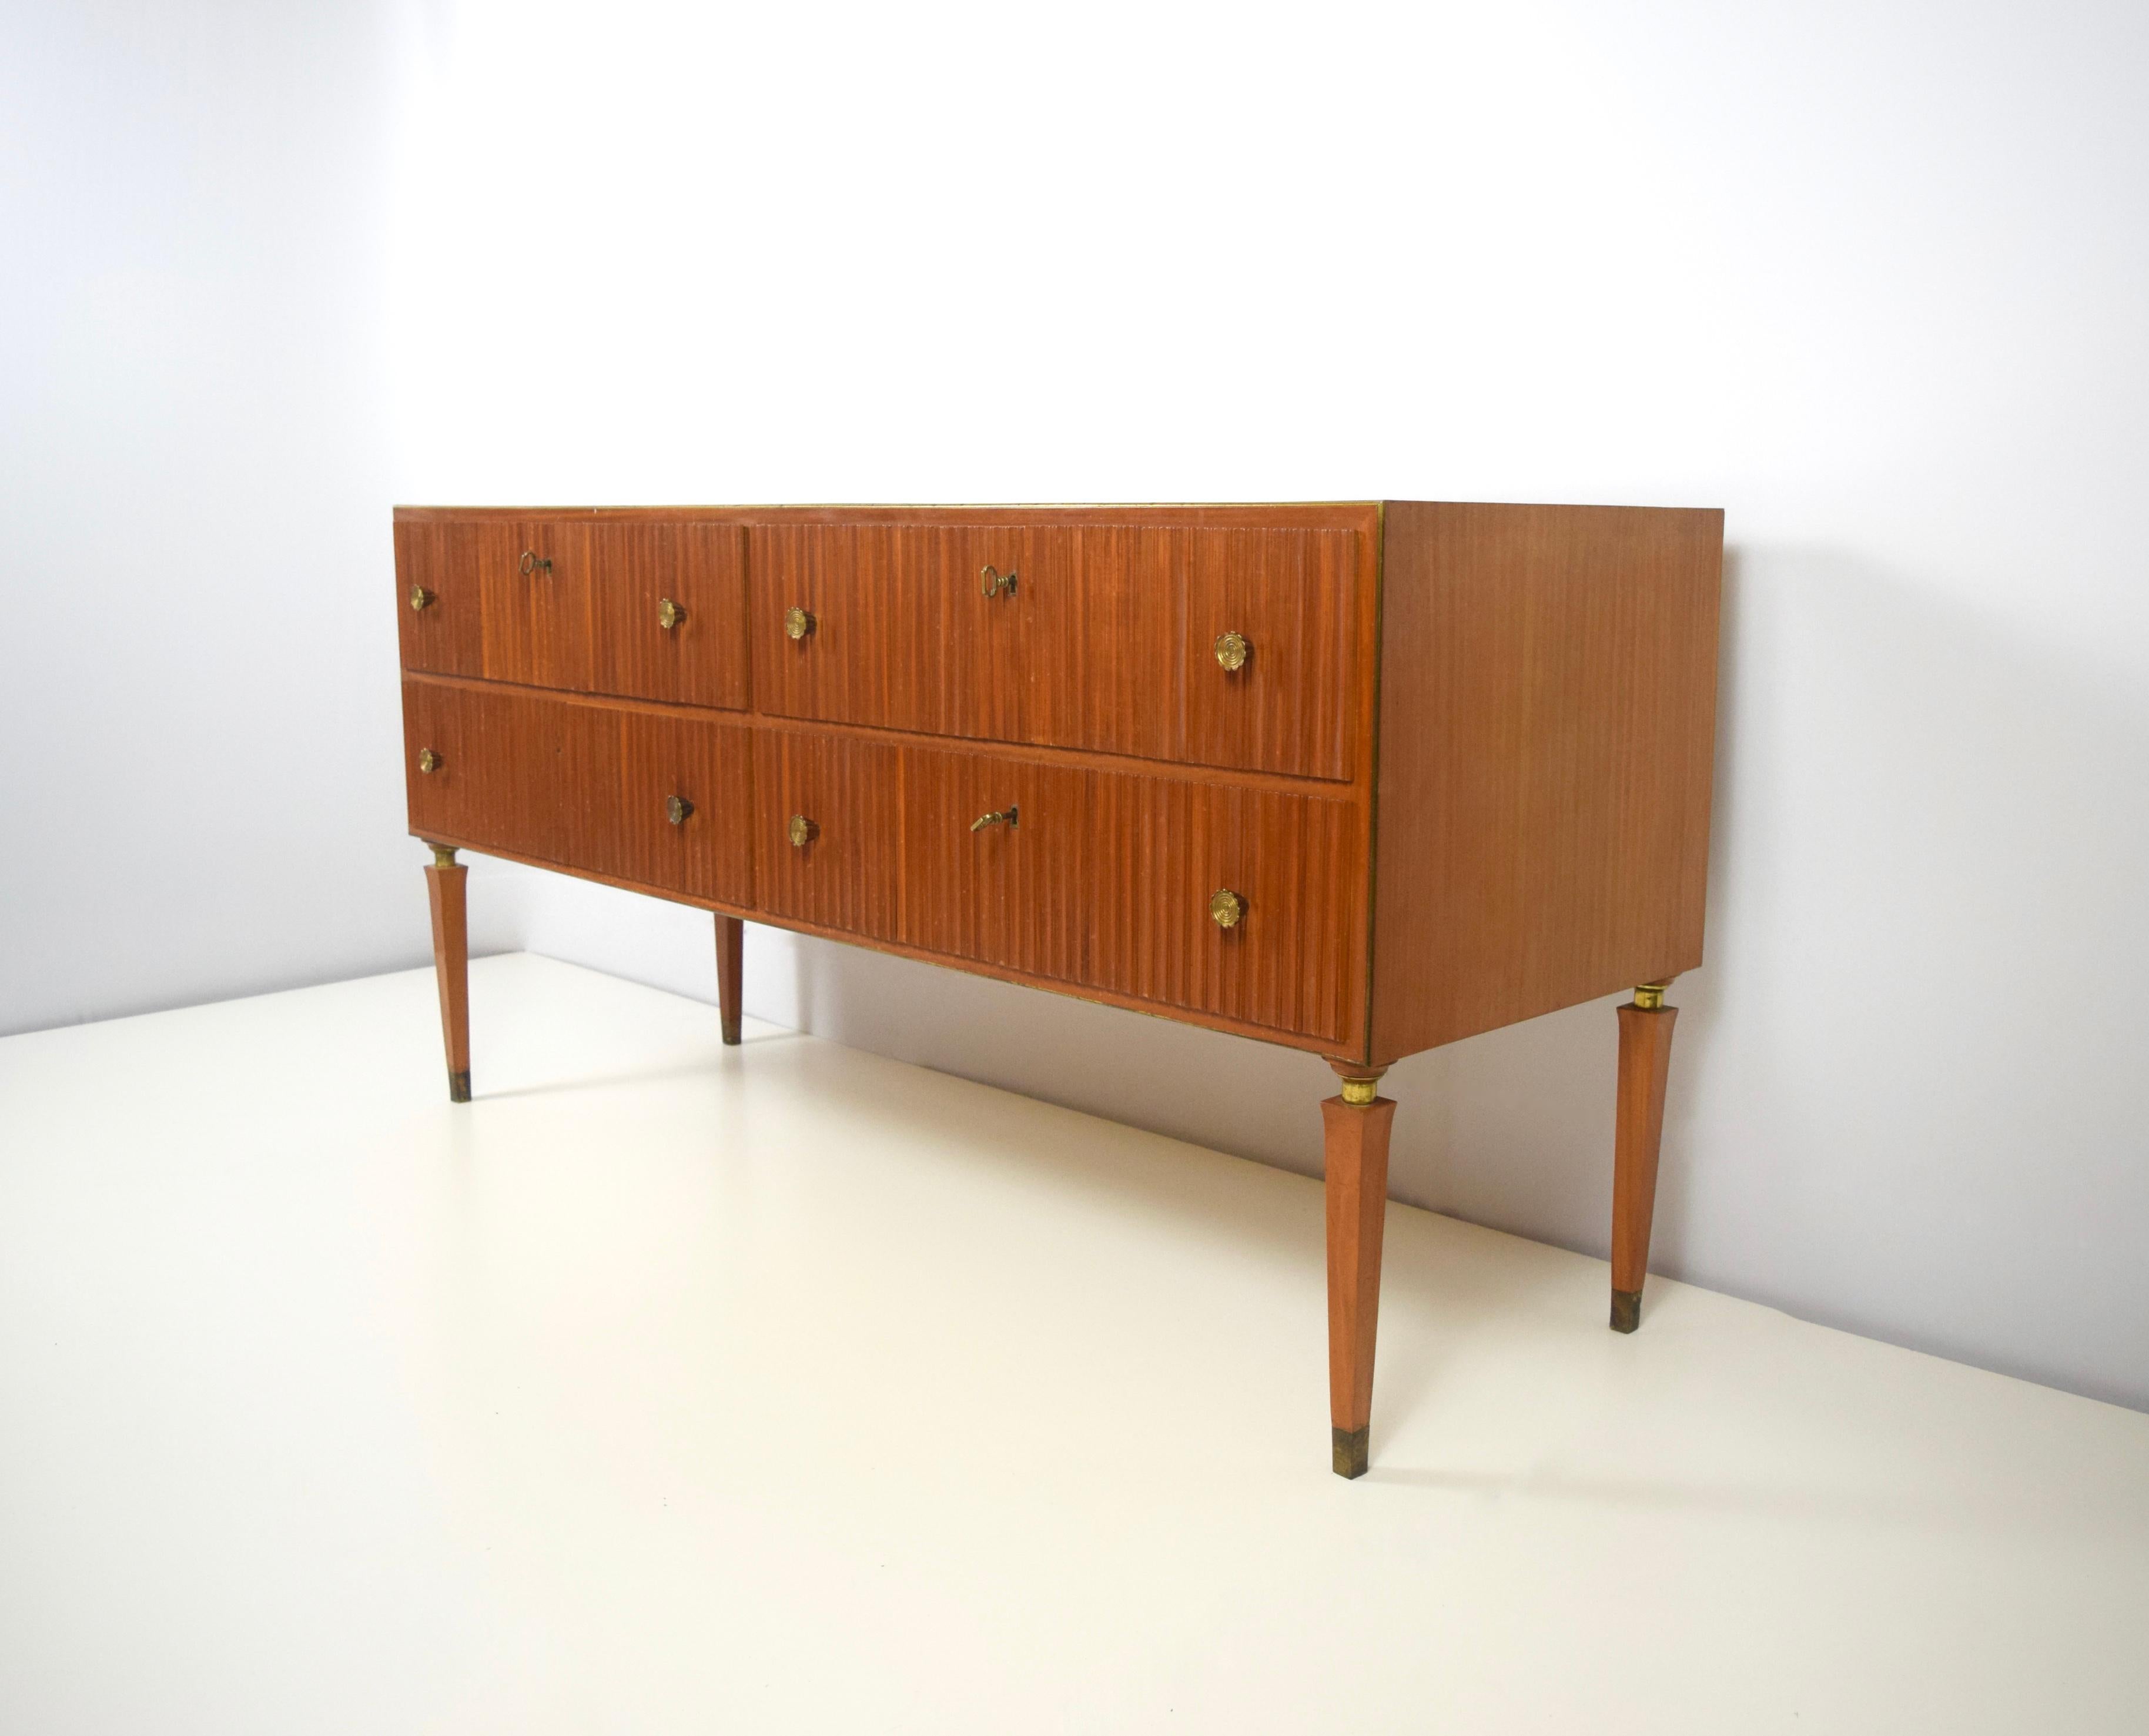 Absolutely stunning and elegant credenza with mahogany and brass designed by Paolo Buffa from Italy, 1940s or 1950s. The credenza has four drawers and beautiful details. There is a little brass line all around the credenza. The handles have a flower